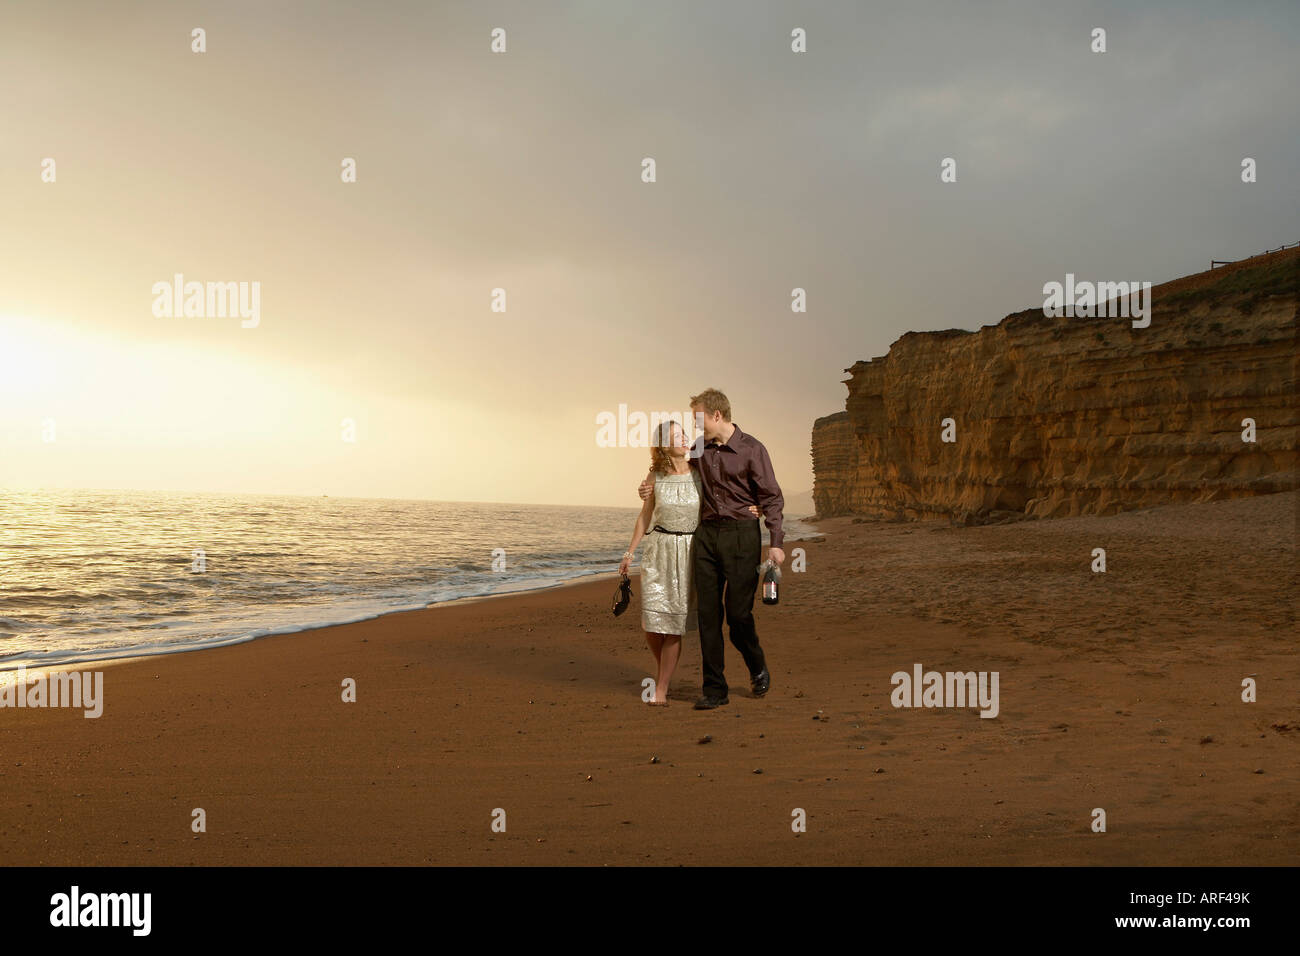 Man and woman strolling along a beach Stock Photo